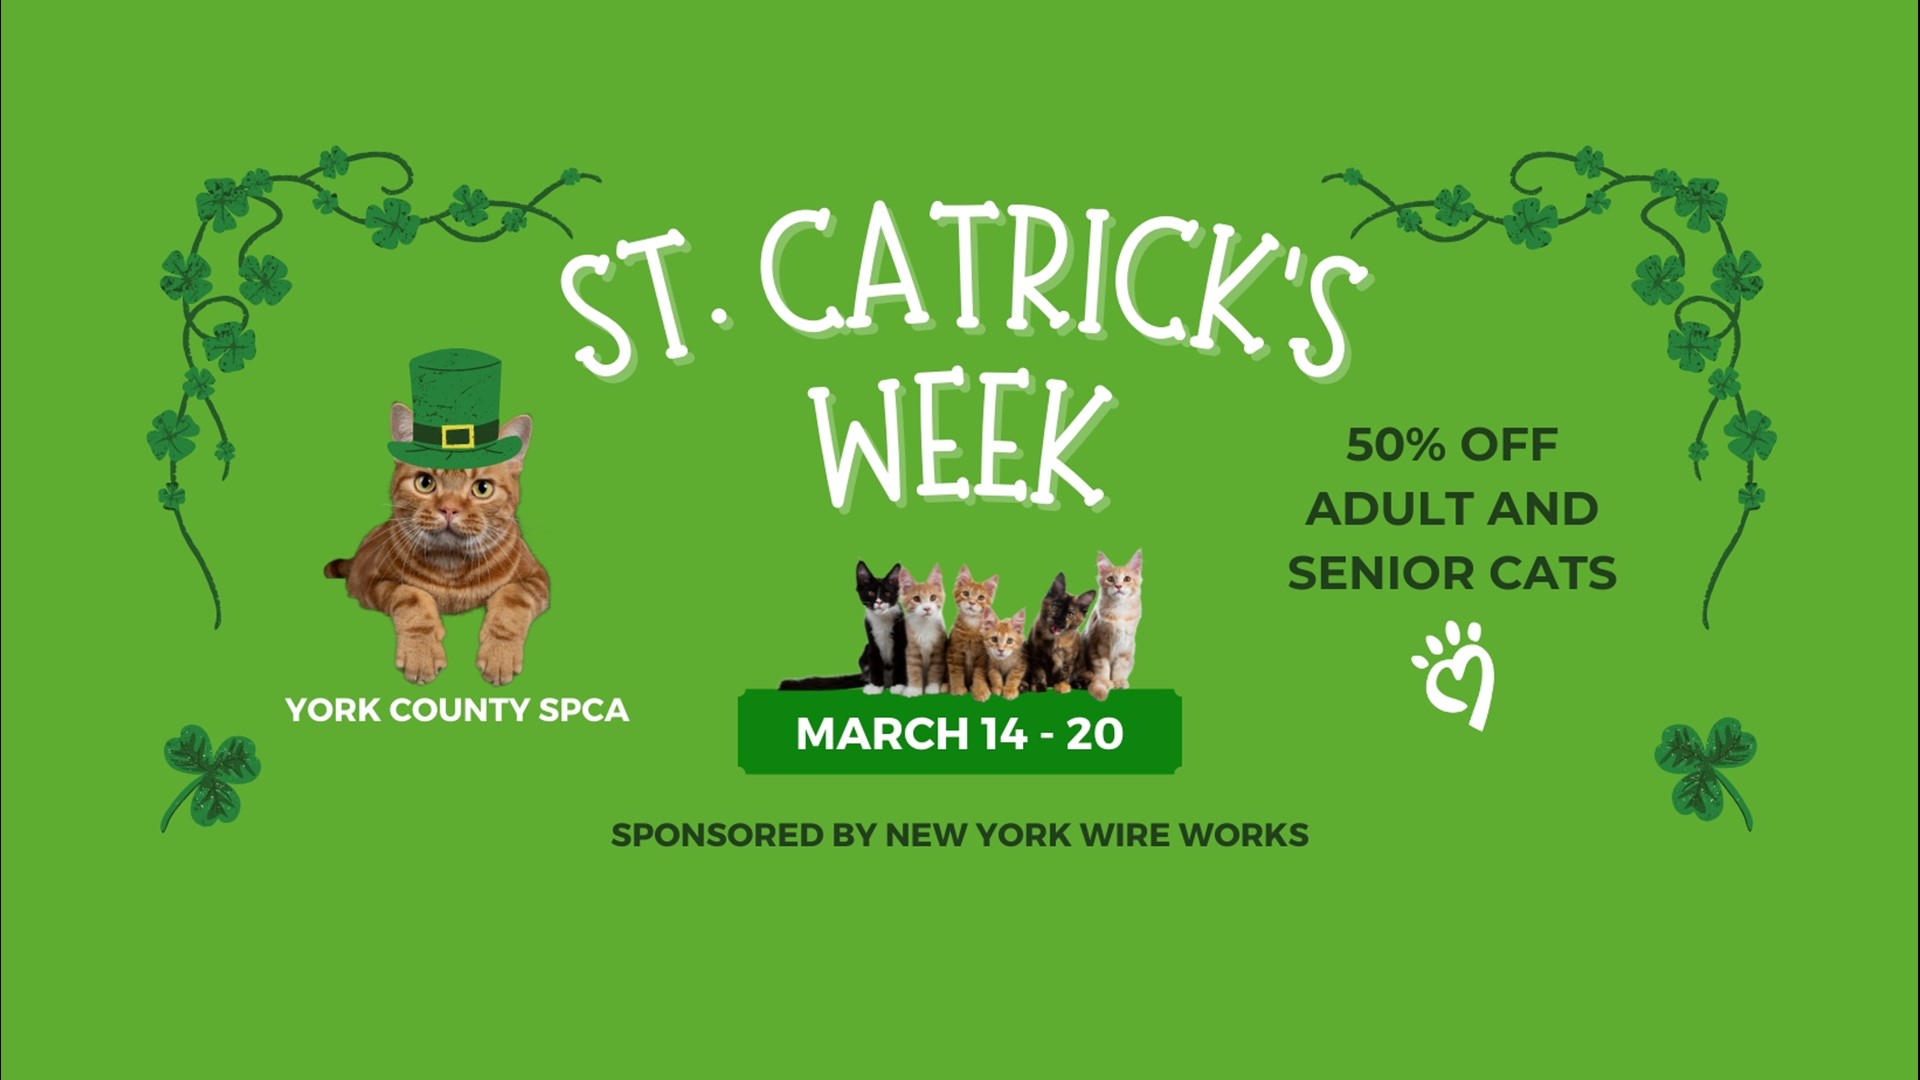 Through March 20, interested adopters can get 50% off any adult or senior cat.